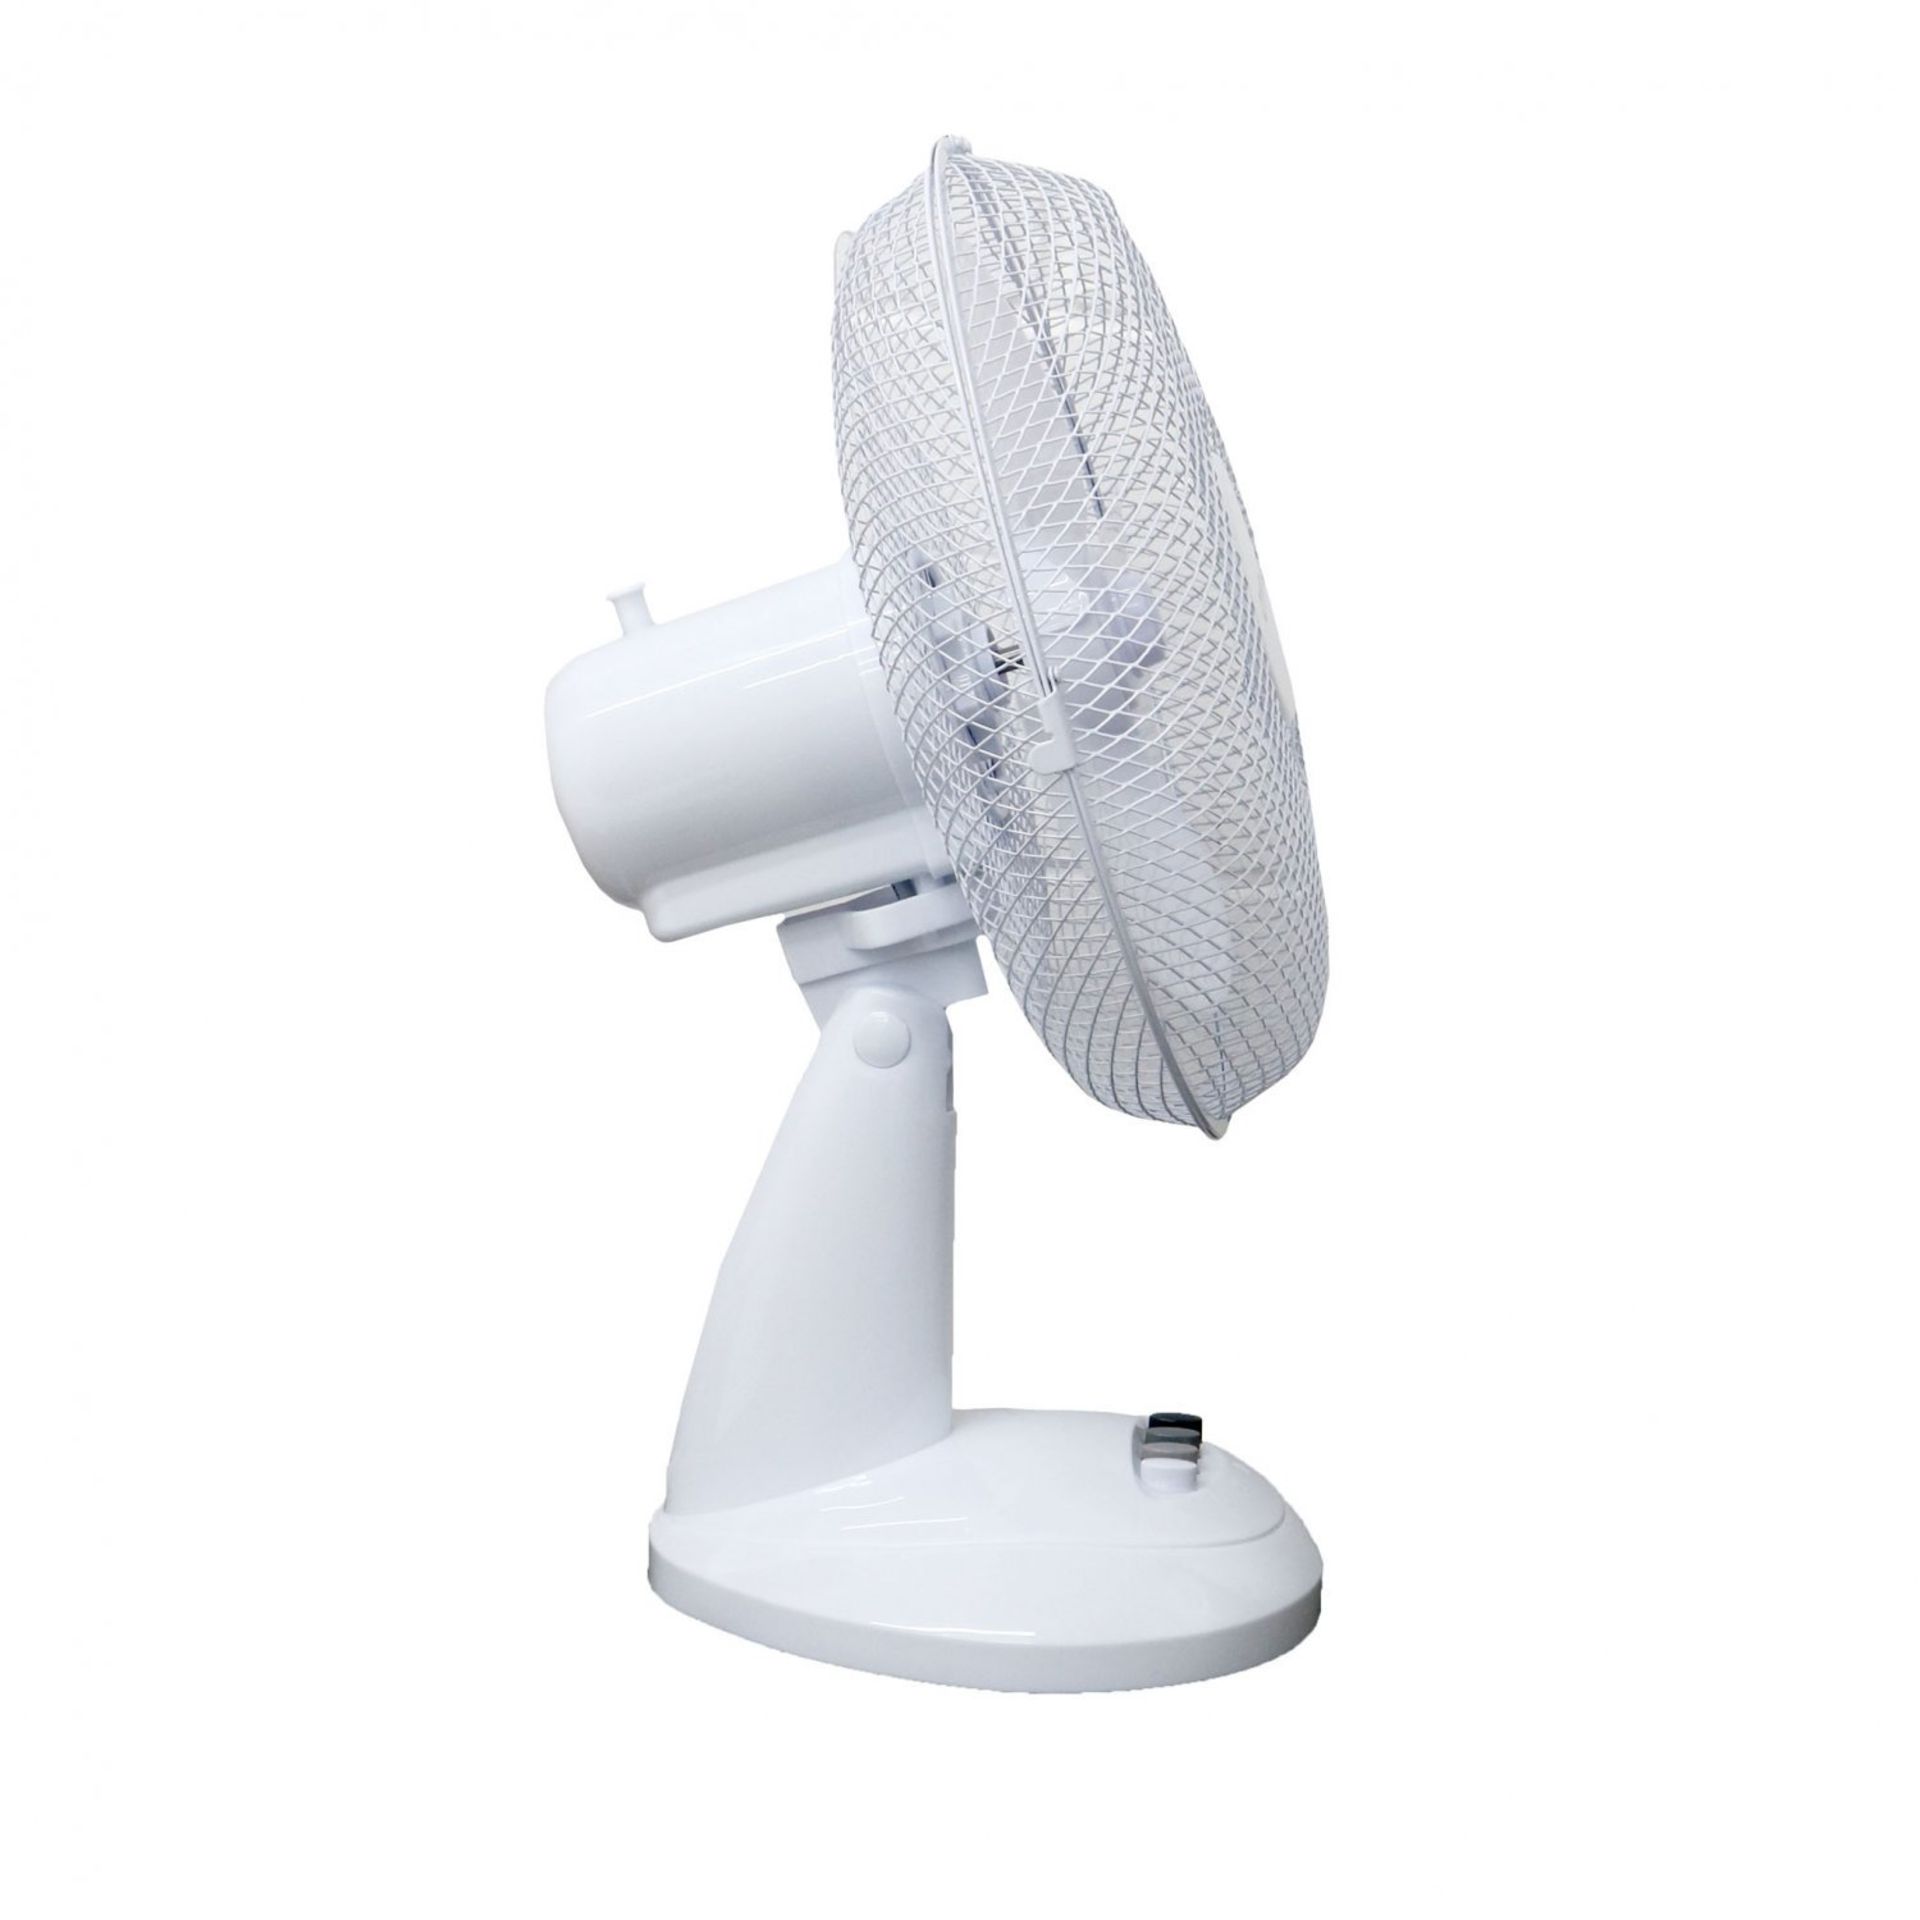 (LF262) 12" Oscillating White Desk Top Fan 3 Speed Push Button Speed Control Cable Length App... - Image 2 of 3